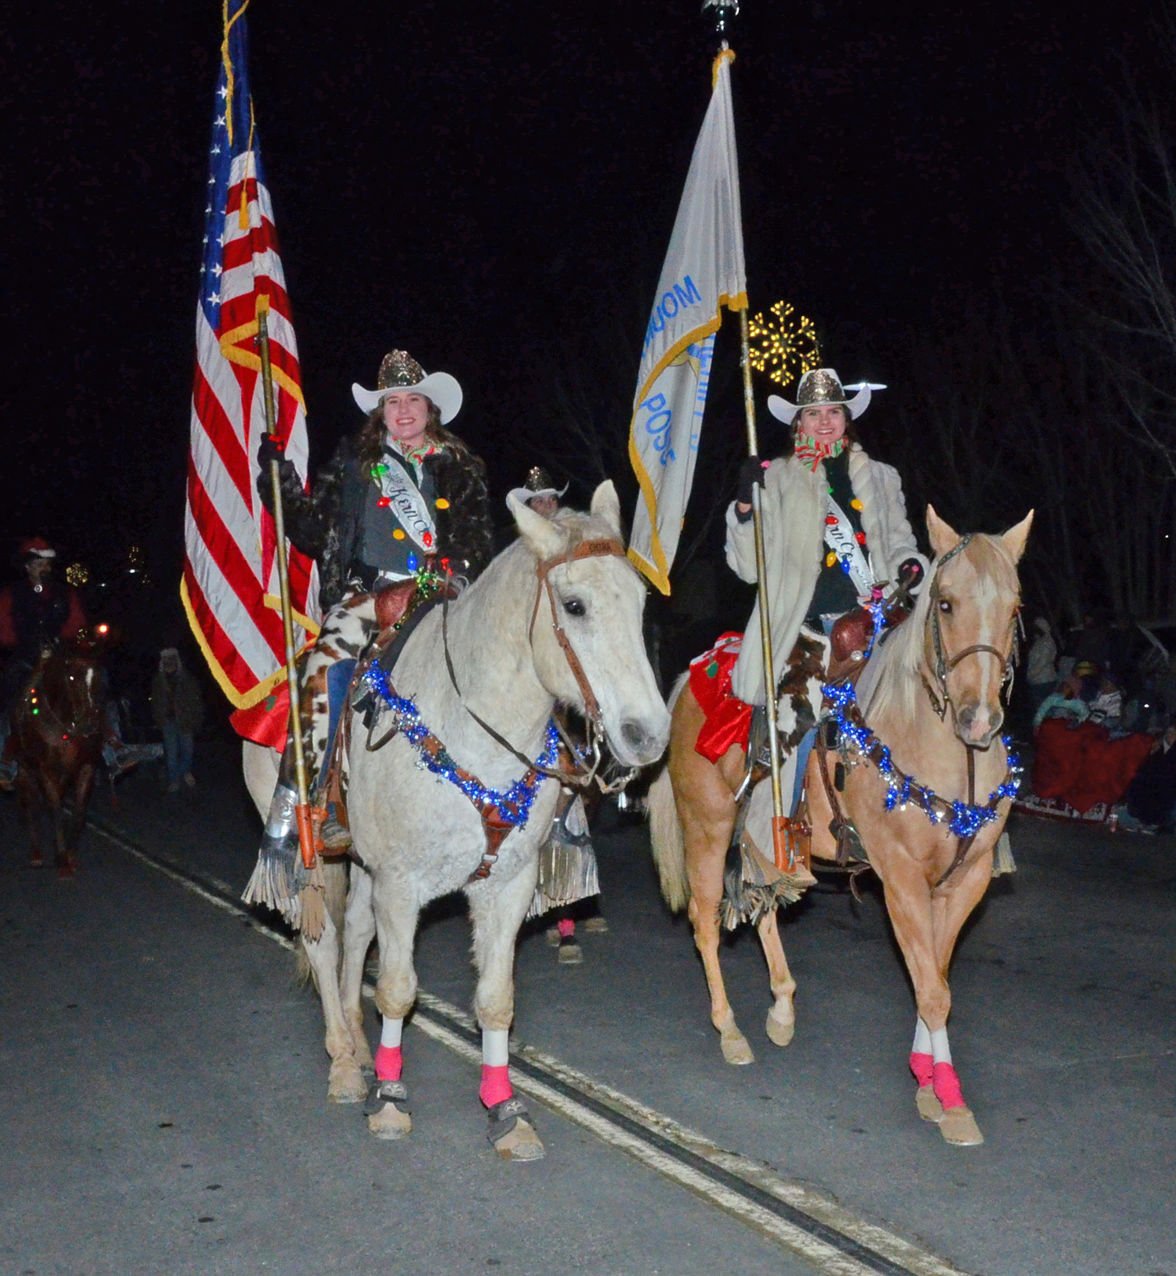 PHOTO GALLERY Cold temperatures don't stop Tehachapi's Christmas